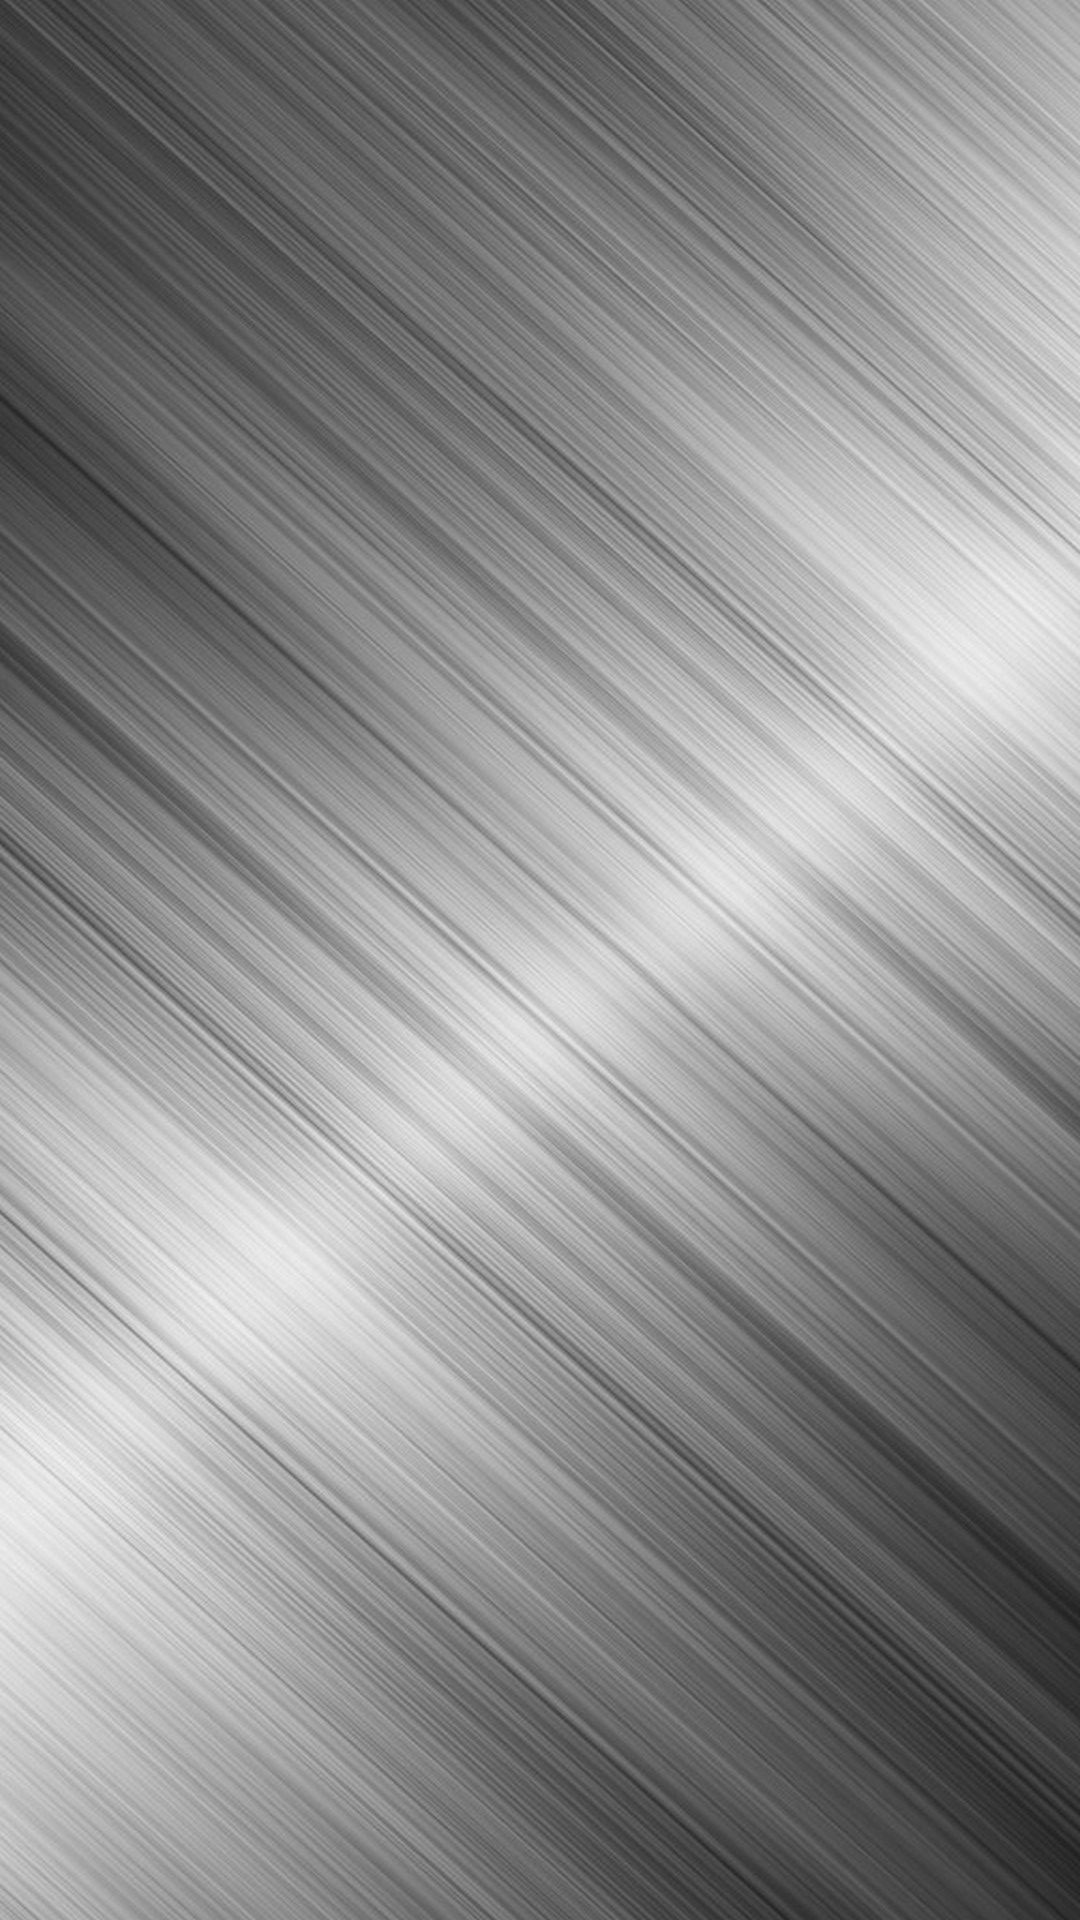 1080x1920, Wallpapers Metallic - Black And Silver Iphone - HD Wallpaper 